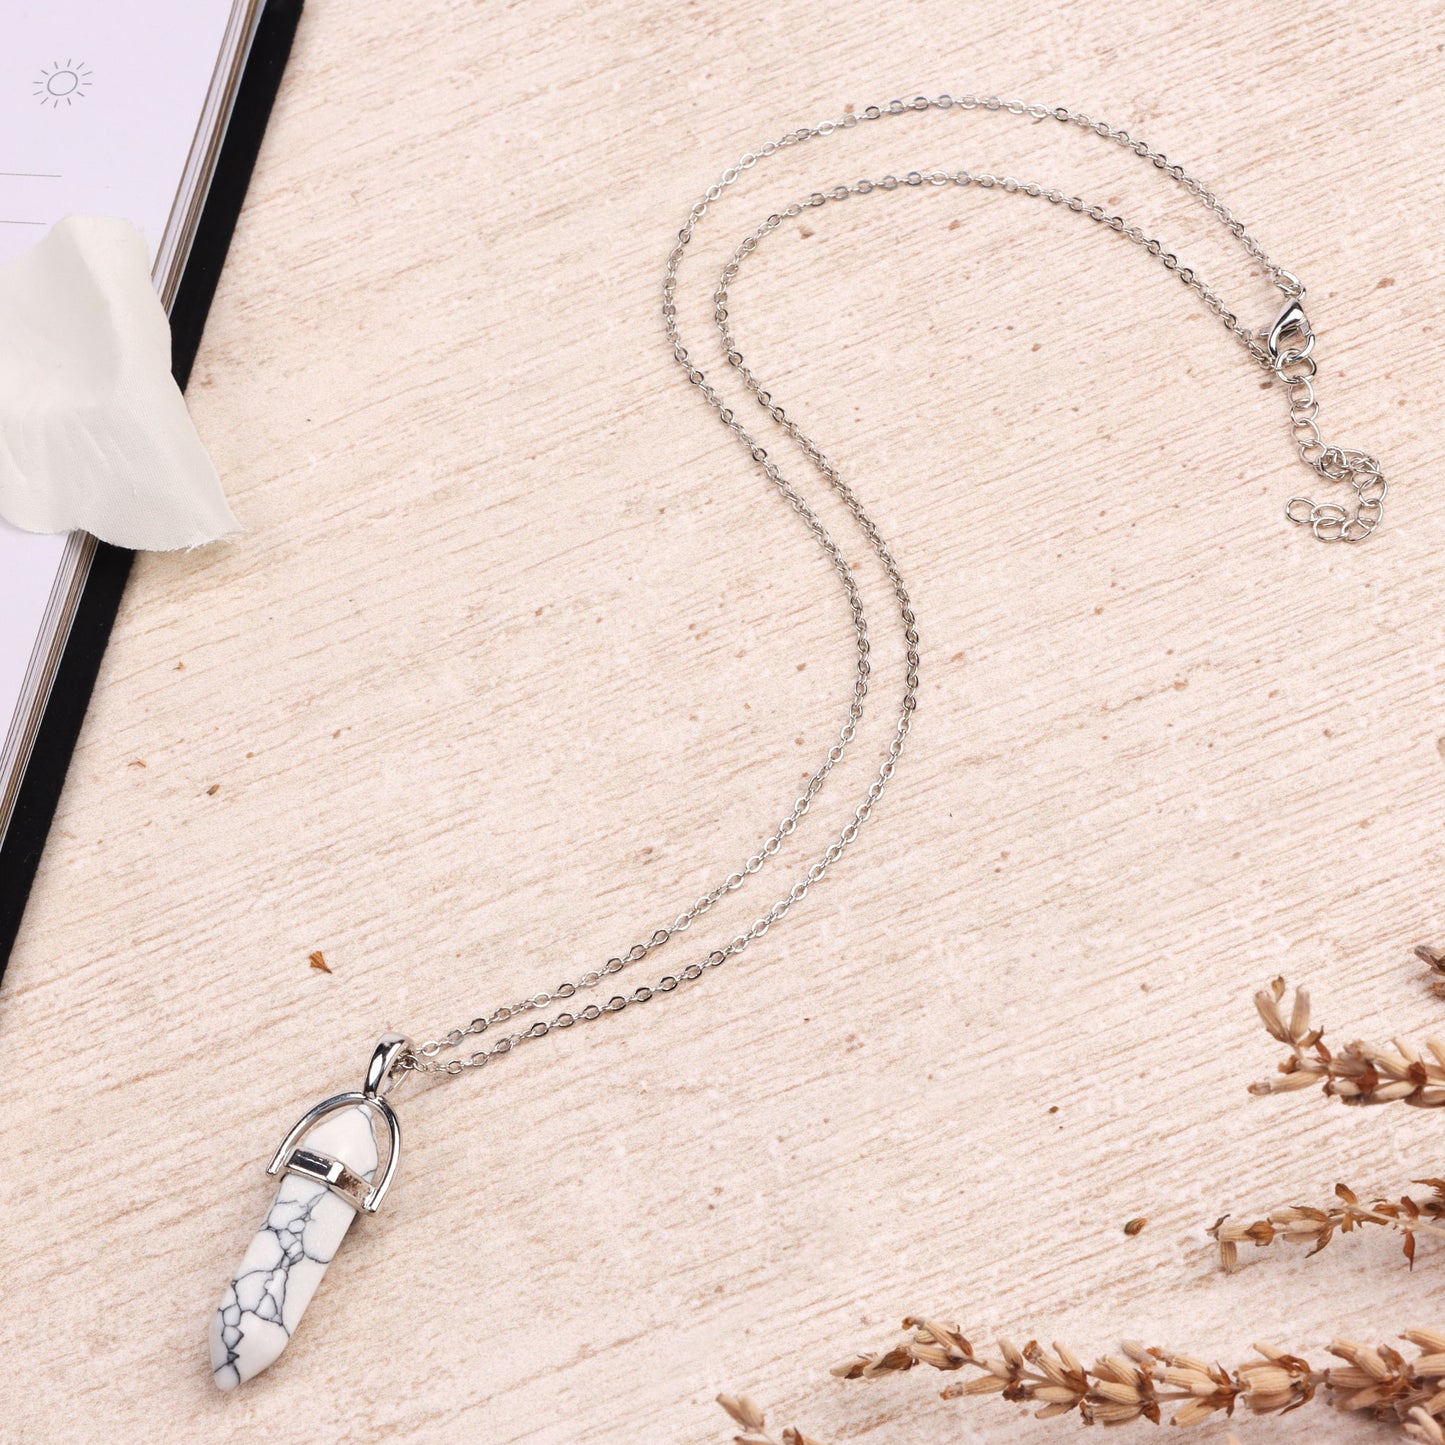 Silver Plated Necklace - White Turquoise Pendant